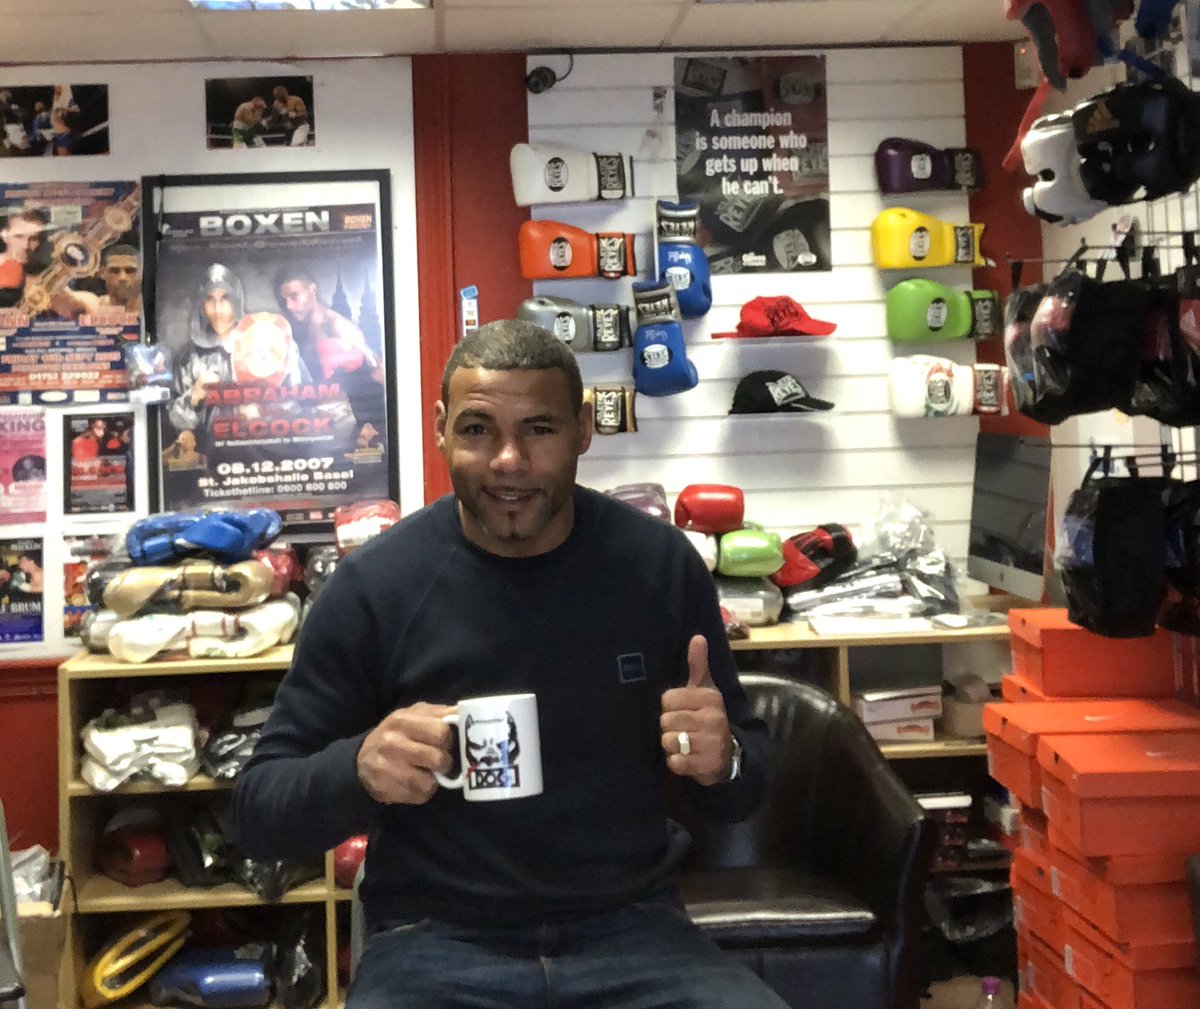 Morning quick cuppa before starting my shift back behind the counter of the Midlands No1 Boxing store@@Maddogsboxing open until 4pm today and from 10:30am until 3pm on Sunday #SeriousAboutBoxing #BoxingEquipment #AmateurBoxing #ProfessionalBoxing #AllThingsBoxing 👊🏽